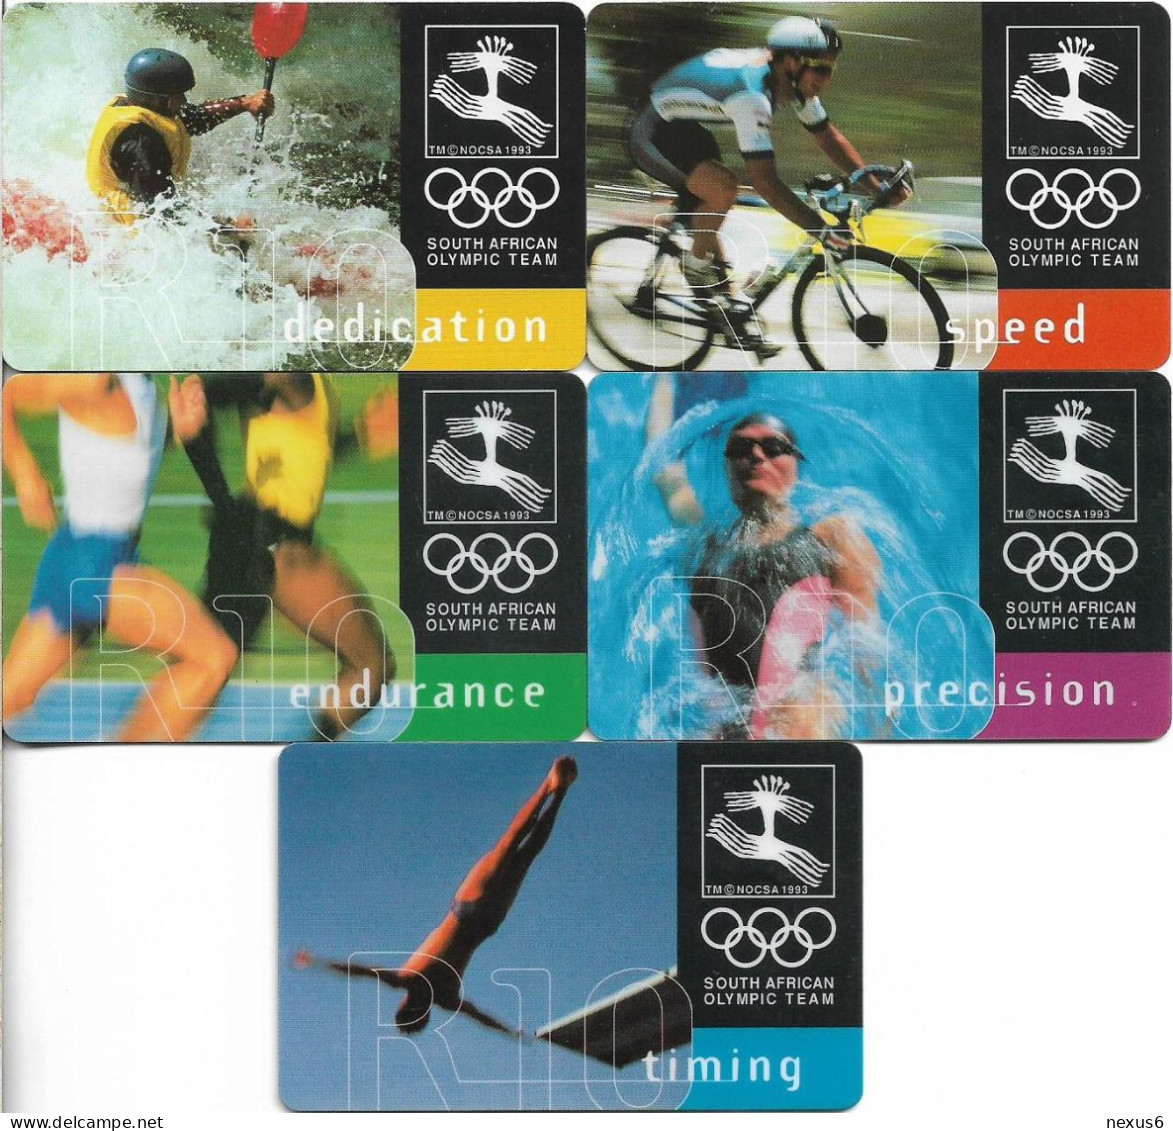 S. Africa - Telkom - Olympic Sports Team Complete Set Of 5 Cards, Chip Siemens S35, 1996, 10R, Used - Sudafrica